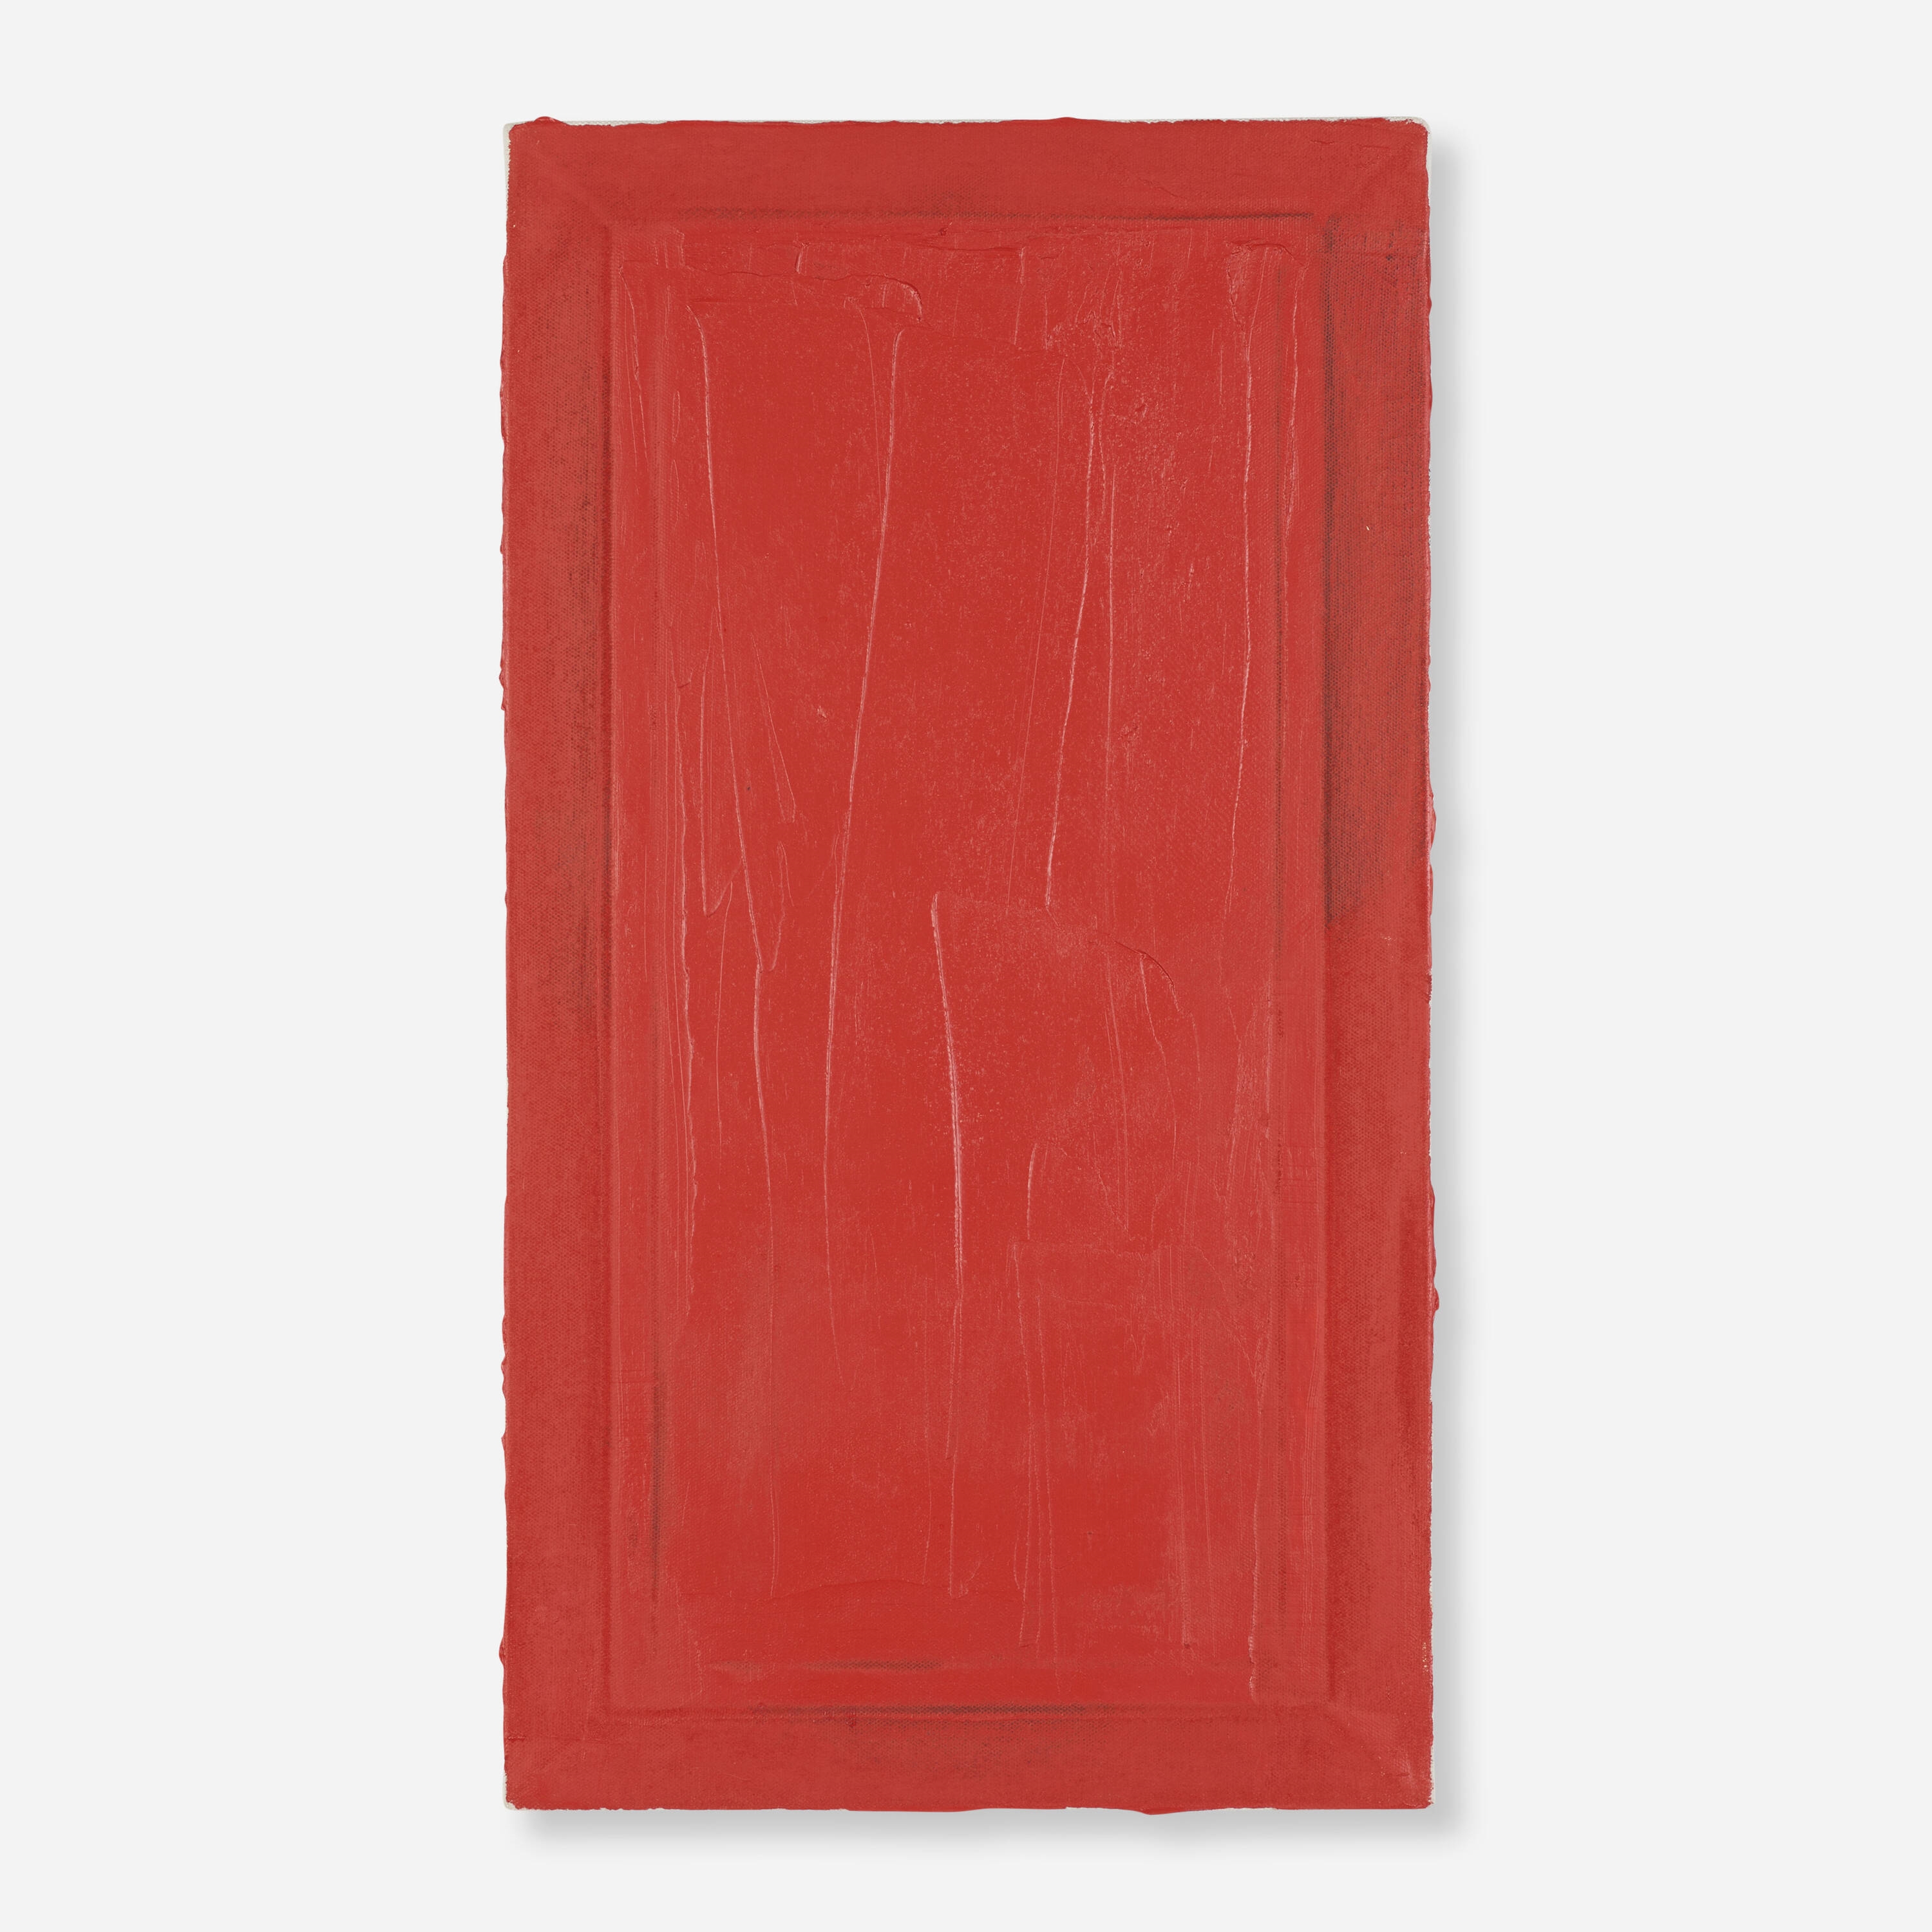 Monochrome Painting (Red) by Jason Pickleman, 2001